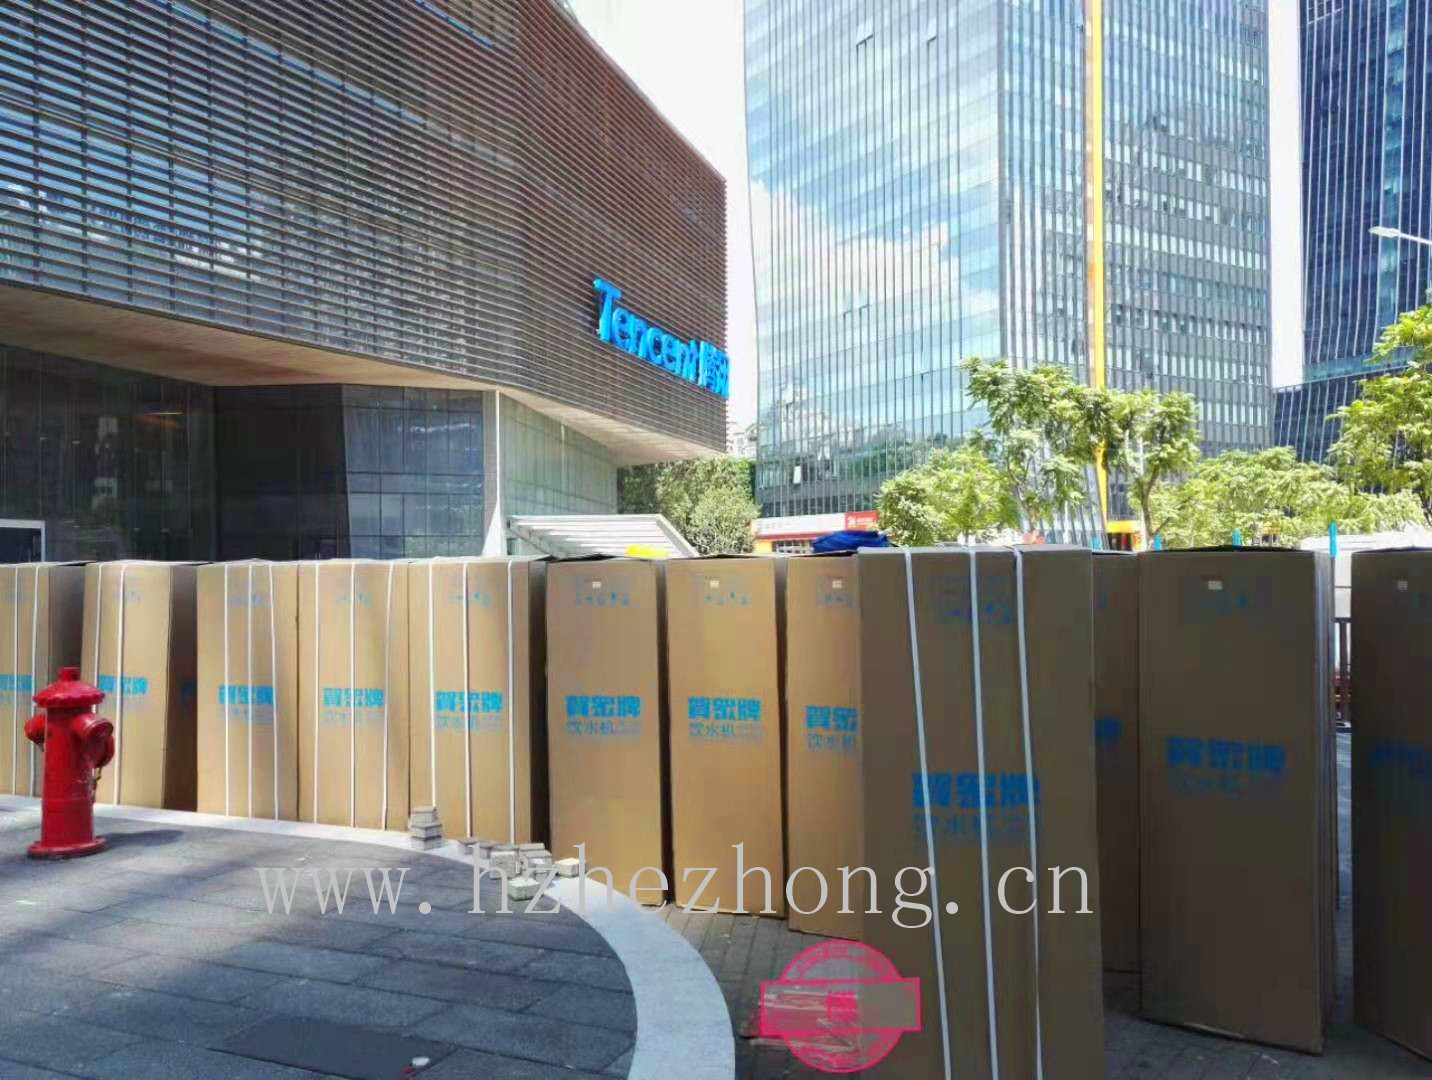 Tencent chose ACUO brand water dispenser